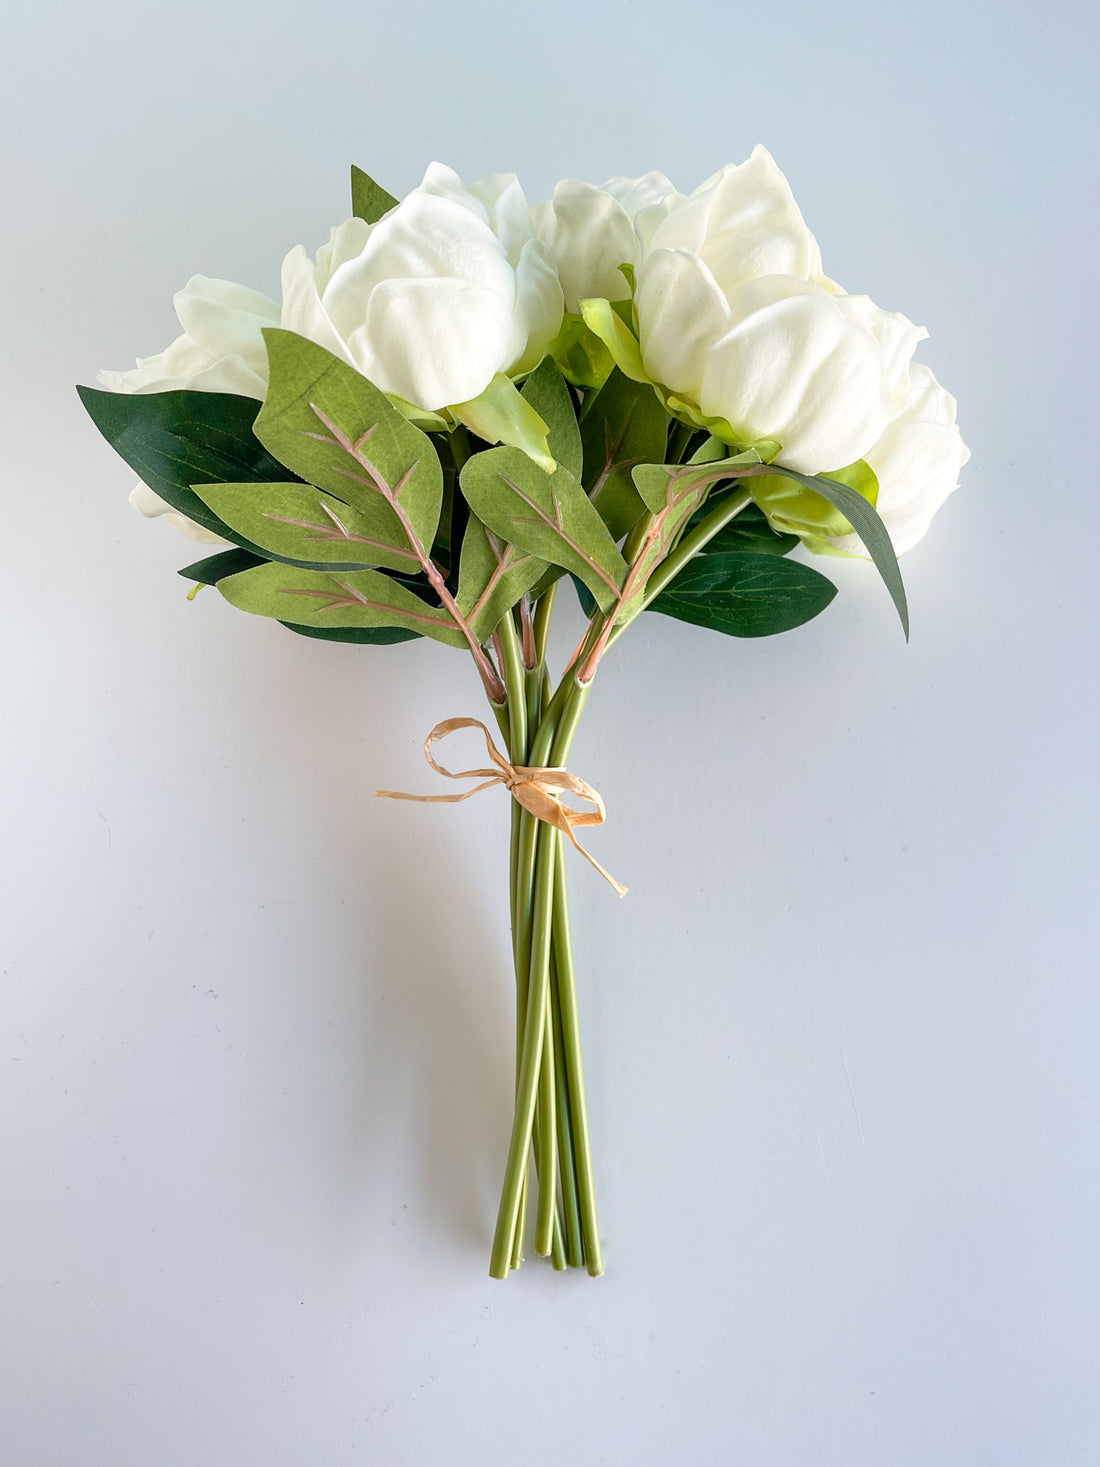 White Real Touch Peony Bundle